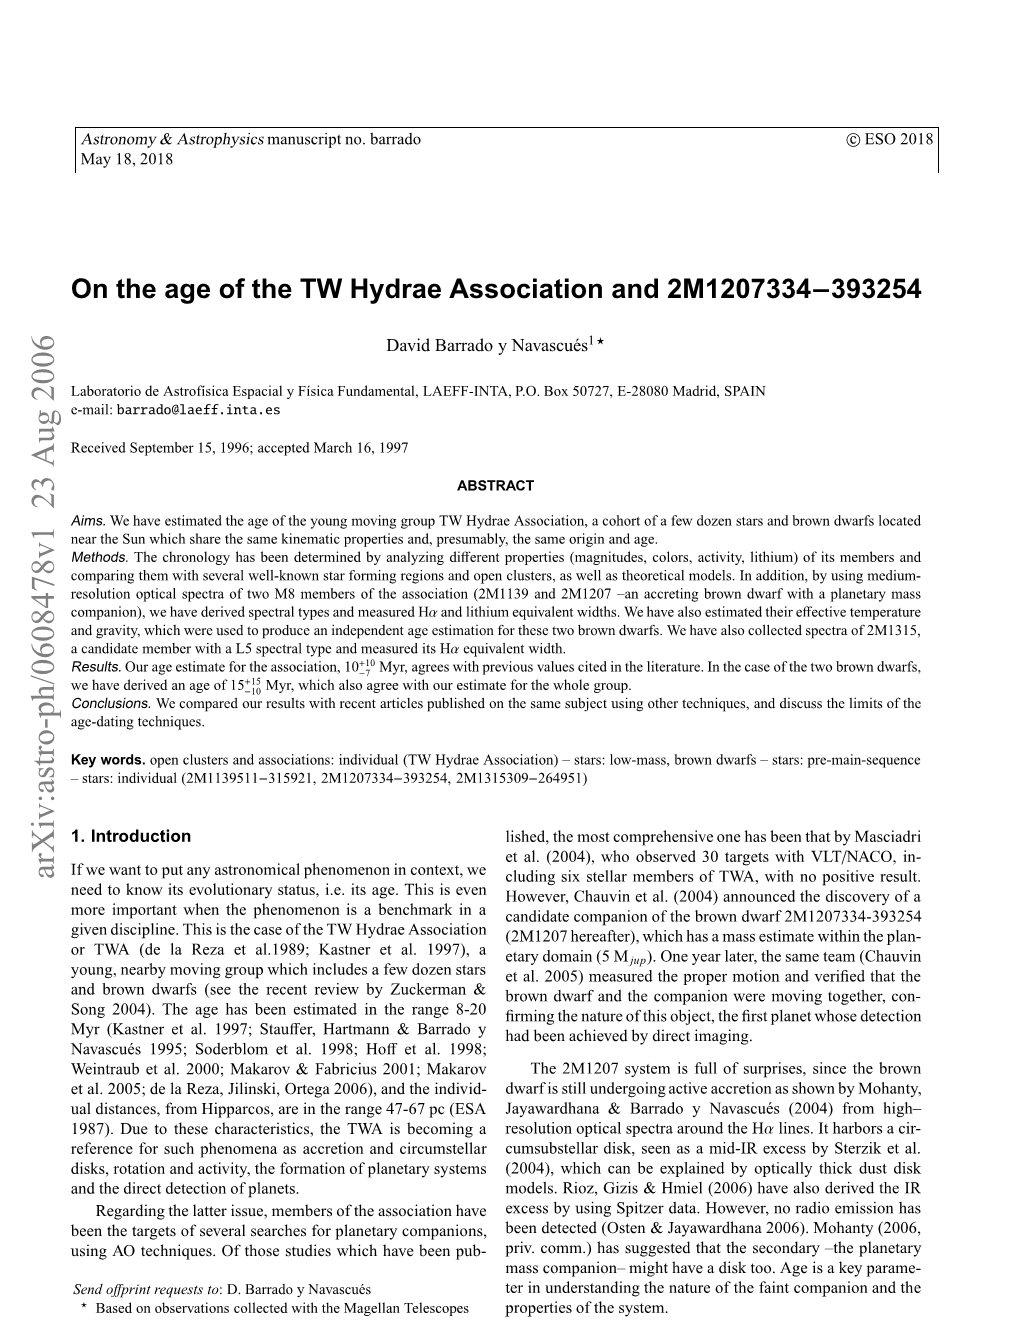 On the Age of the TW Hydrae Association and 2M1207334